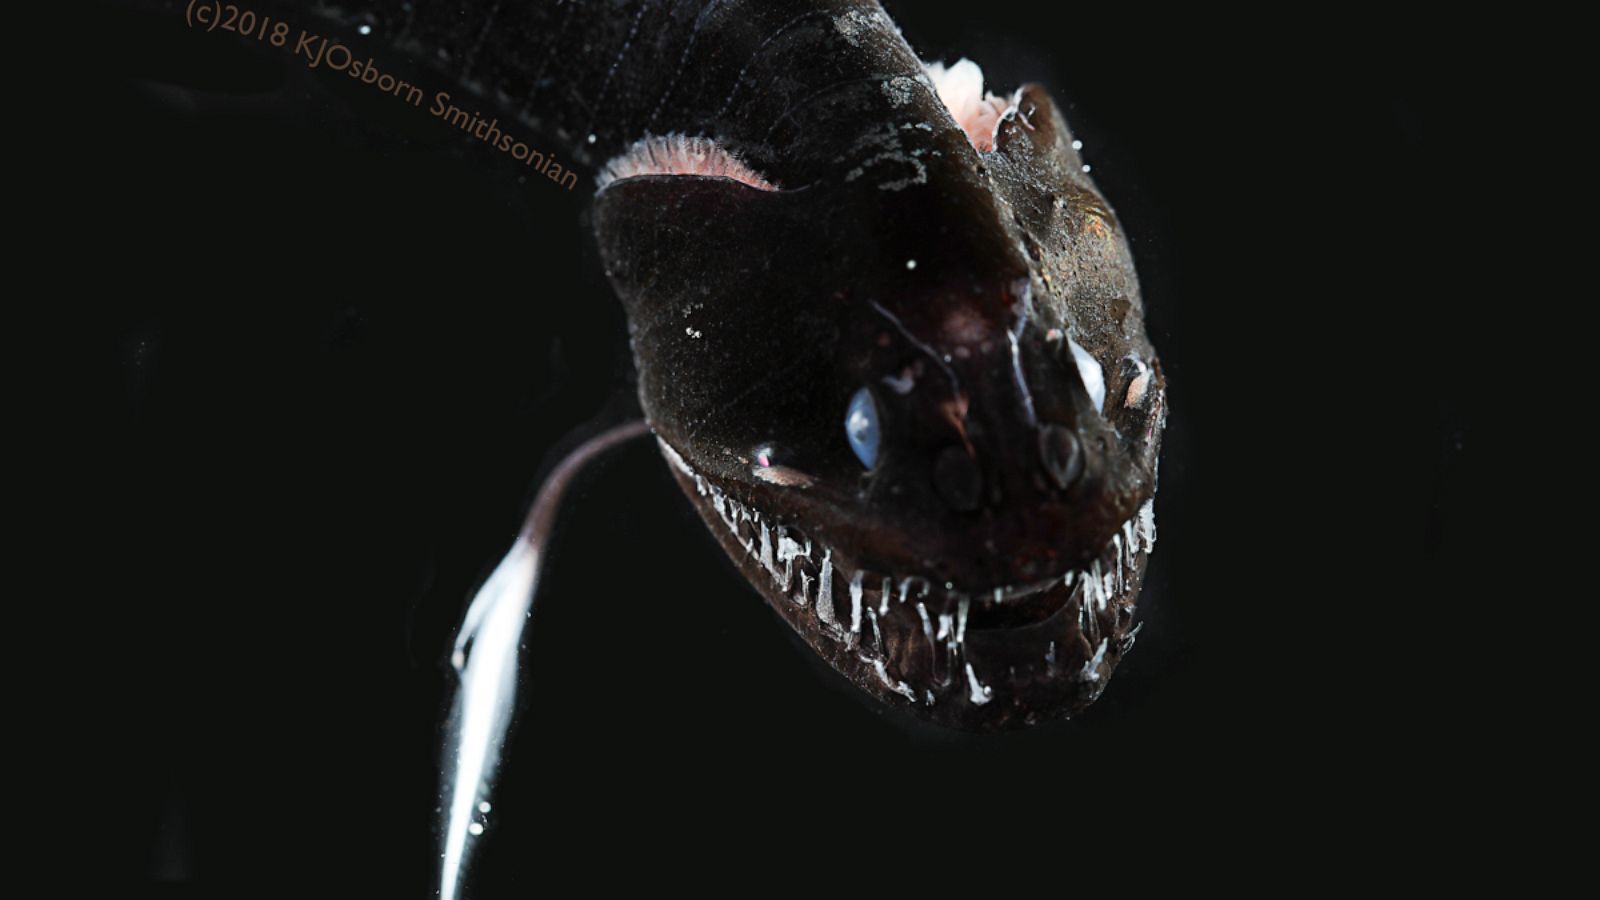 Scientists discover ultra-black deep sea fish, among the darkest creatures  ever found - ABC News